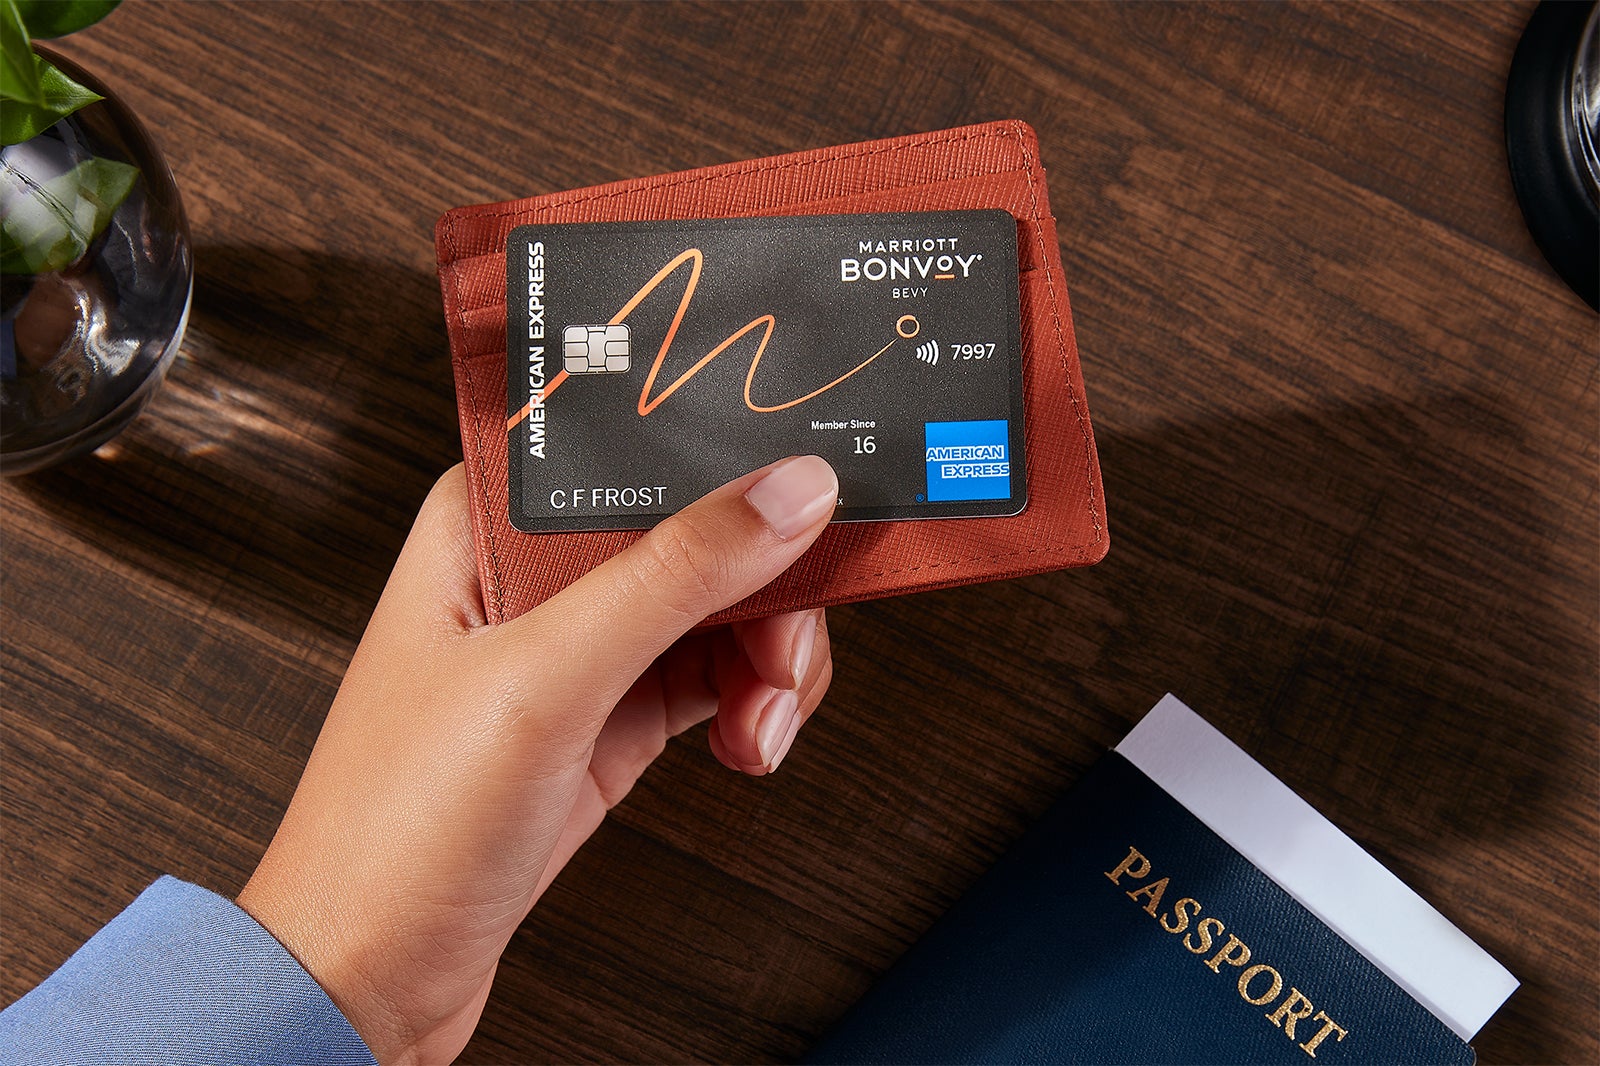 Who should (and shouldn’t) get the Marriott Bonvoy Bevy card?